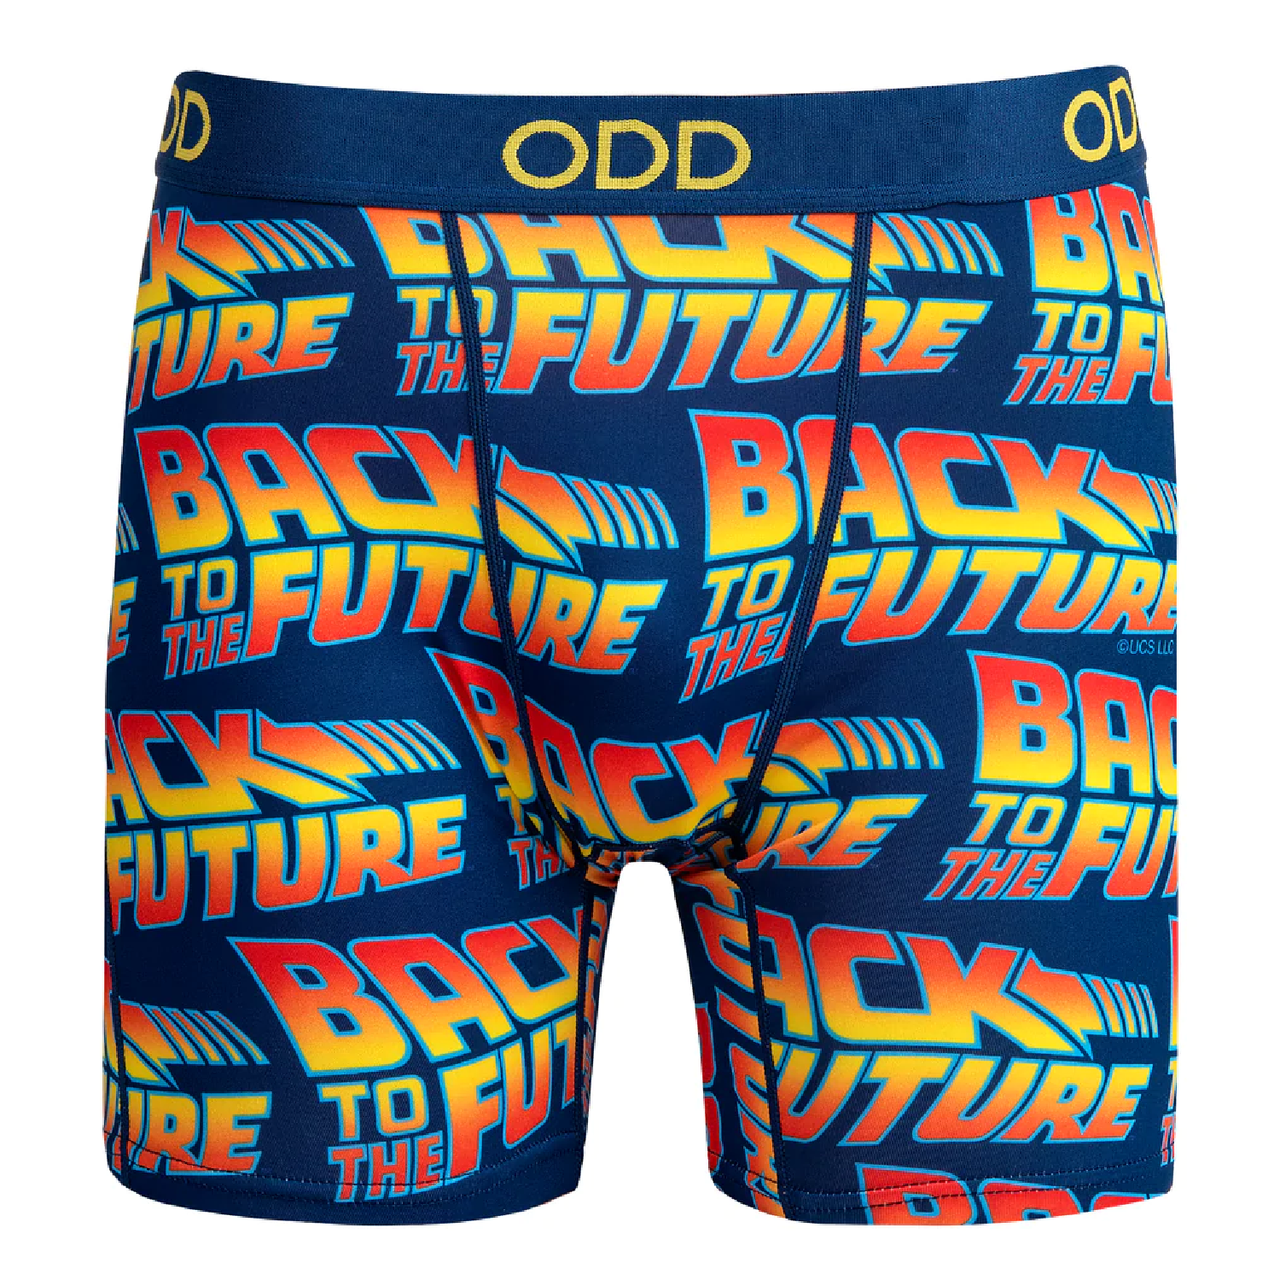 https://cdn11.bigcommerce.com/s-c9a80/images/stencil/1280x1280/products/14082/49292/Back_to_the_Future_Boxer_Briefs_pic_2__85461.1669752742.png?c=2